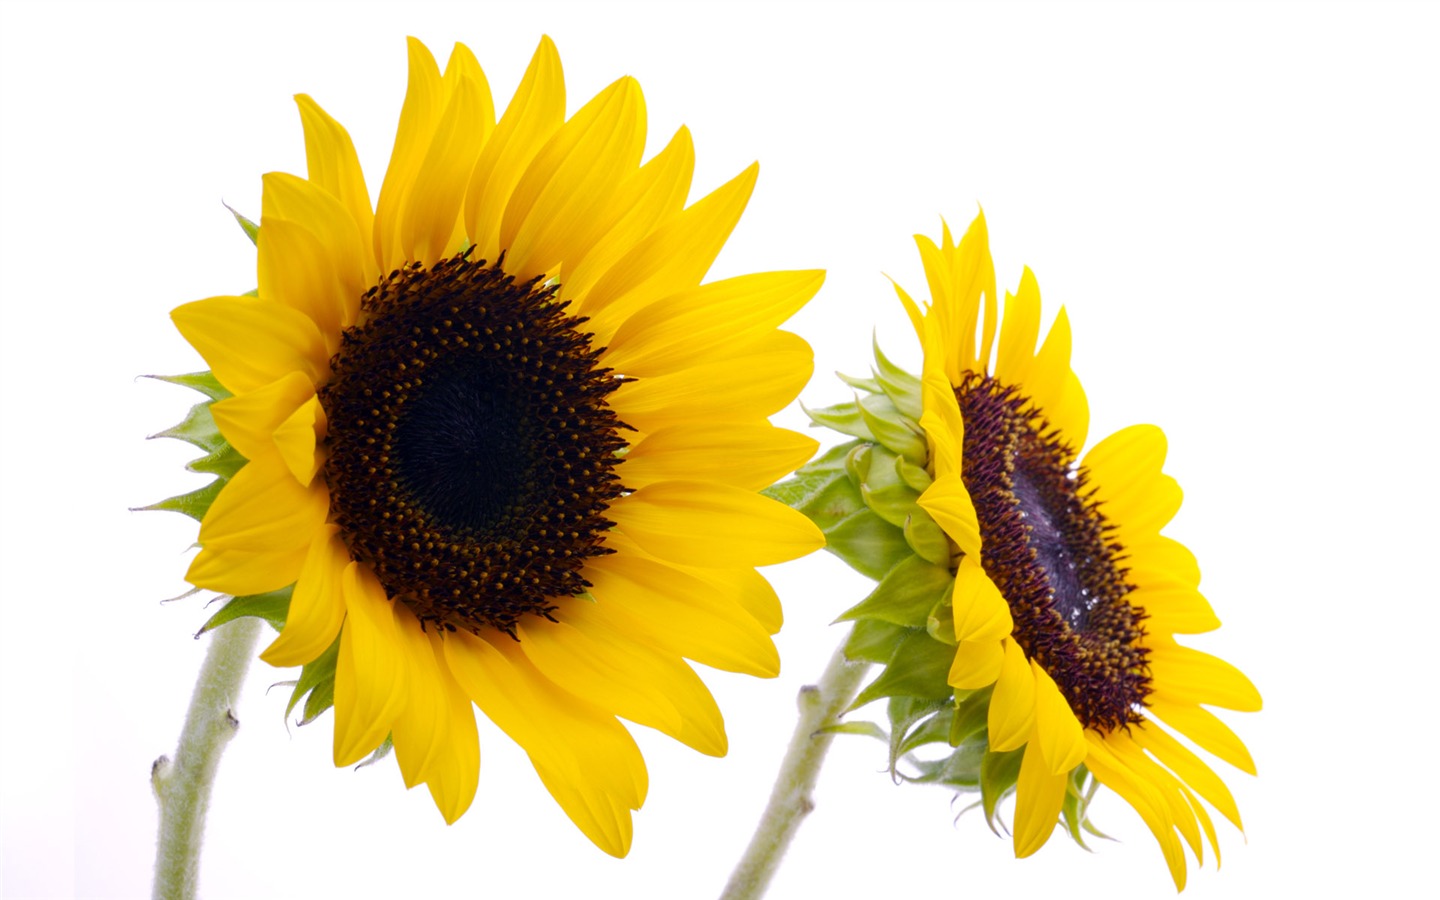 Sunny sunflower photo HD Wallpapers #28 - 1440x900